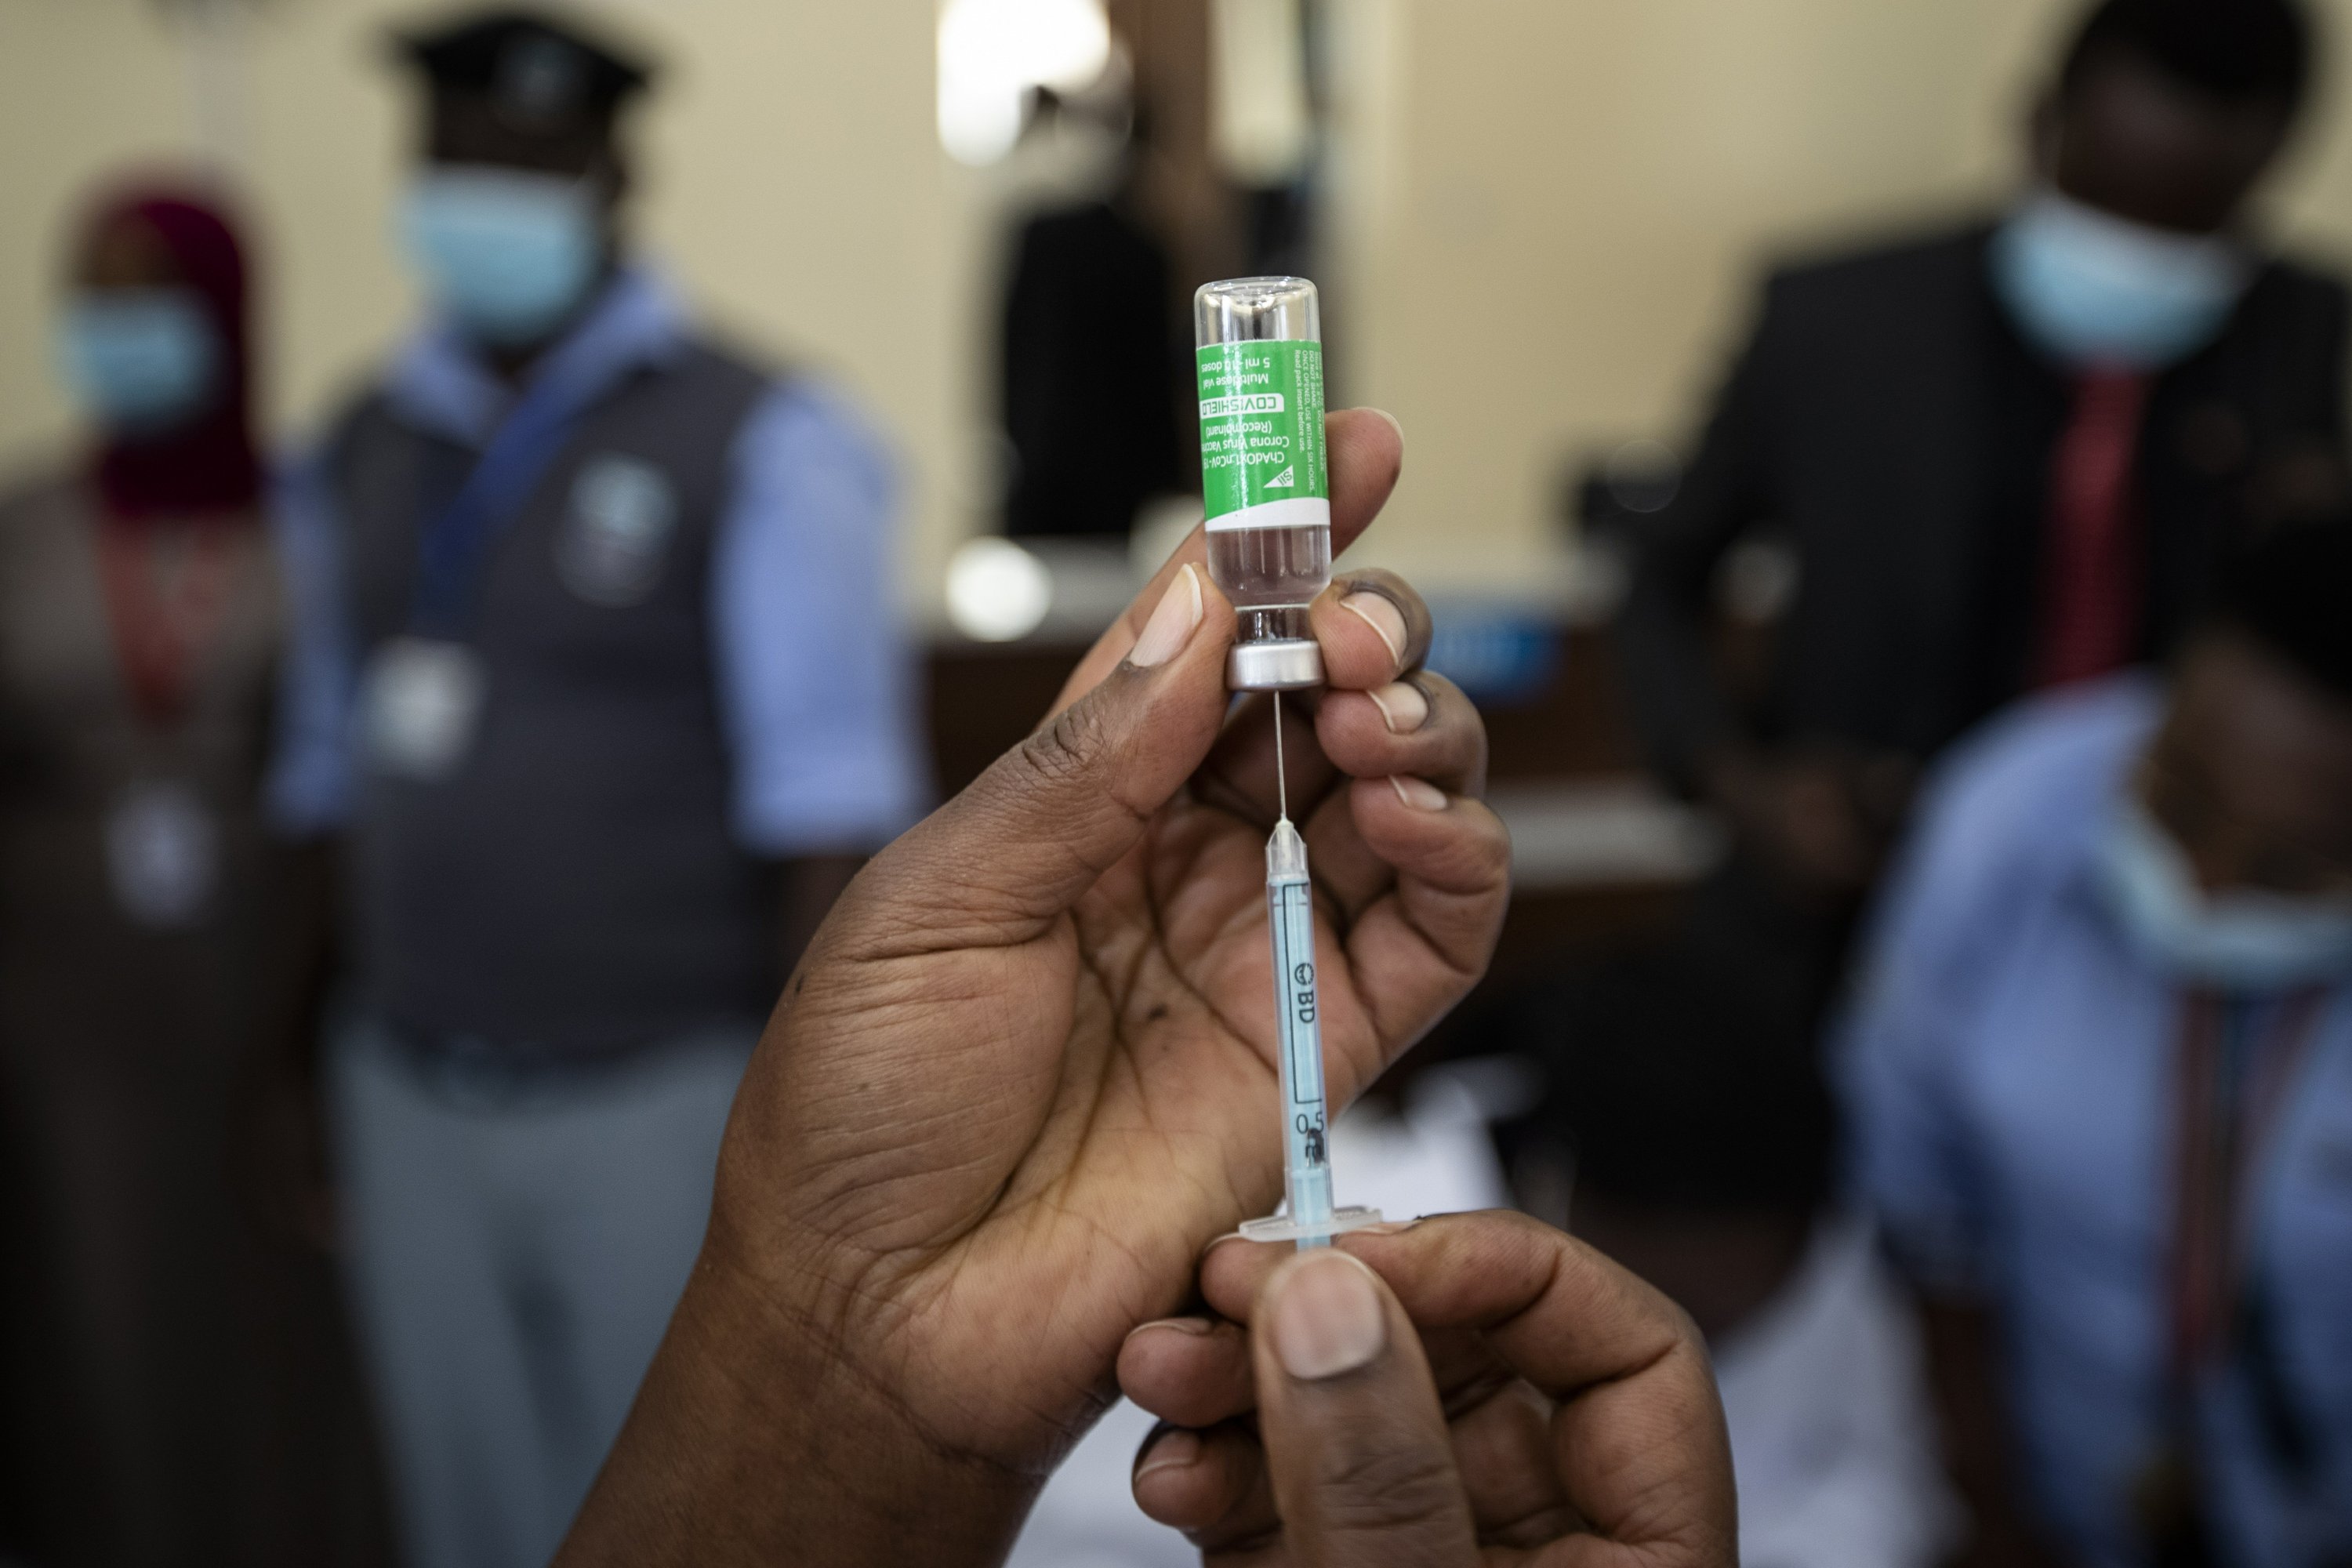 A medical practitioner administers a Covid-19 vaccine. |Photo| Courtesy|